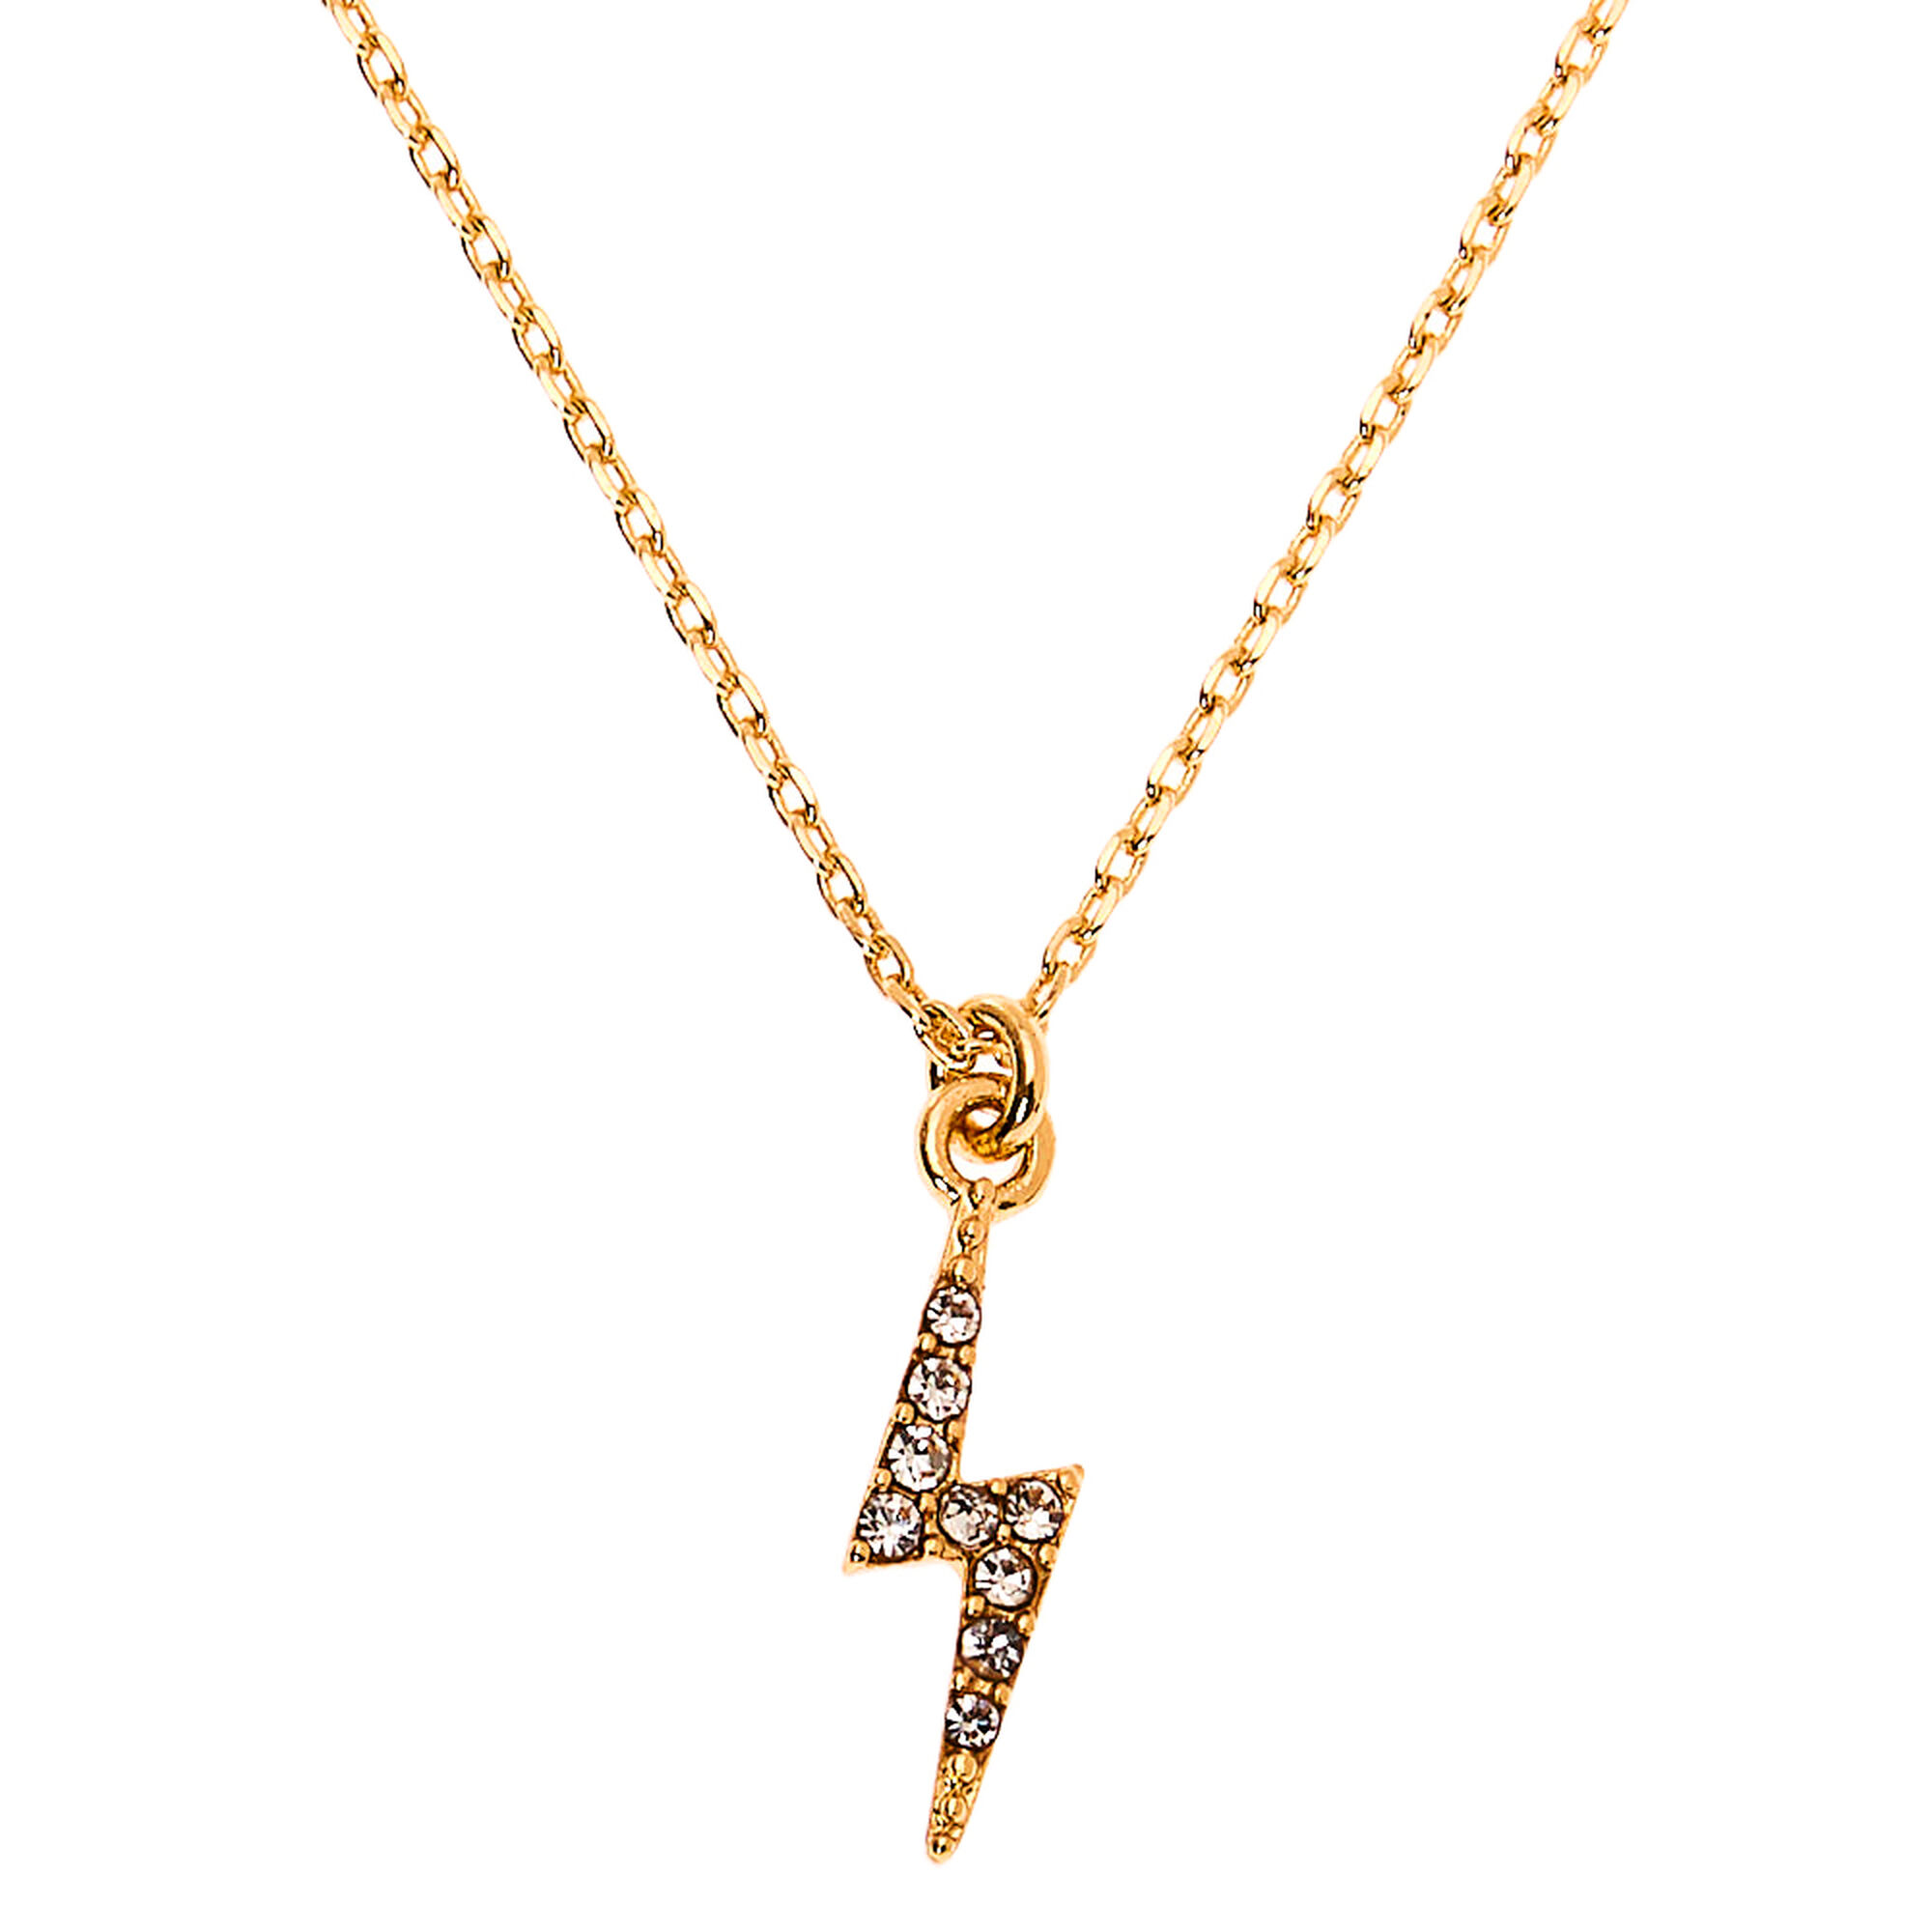 View Claires Tone Lightning Bolt Pendant Necklace Gold information